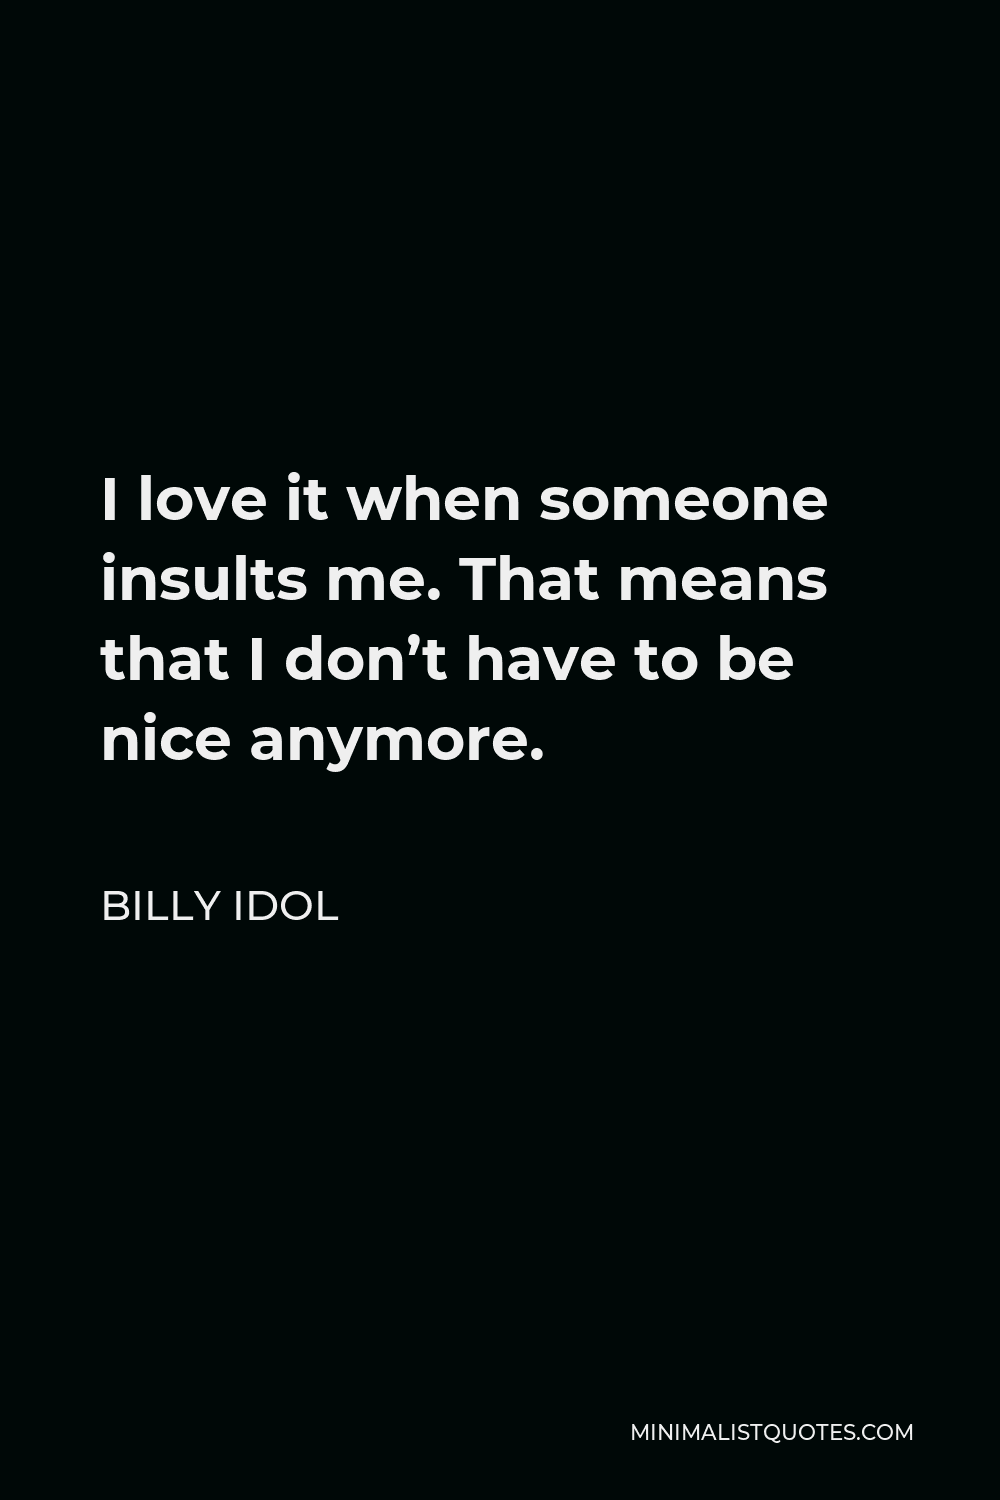 Billy Idol Quote - I love it when someone insults me. That means that I don’t have to be nice anymore.